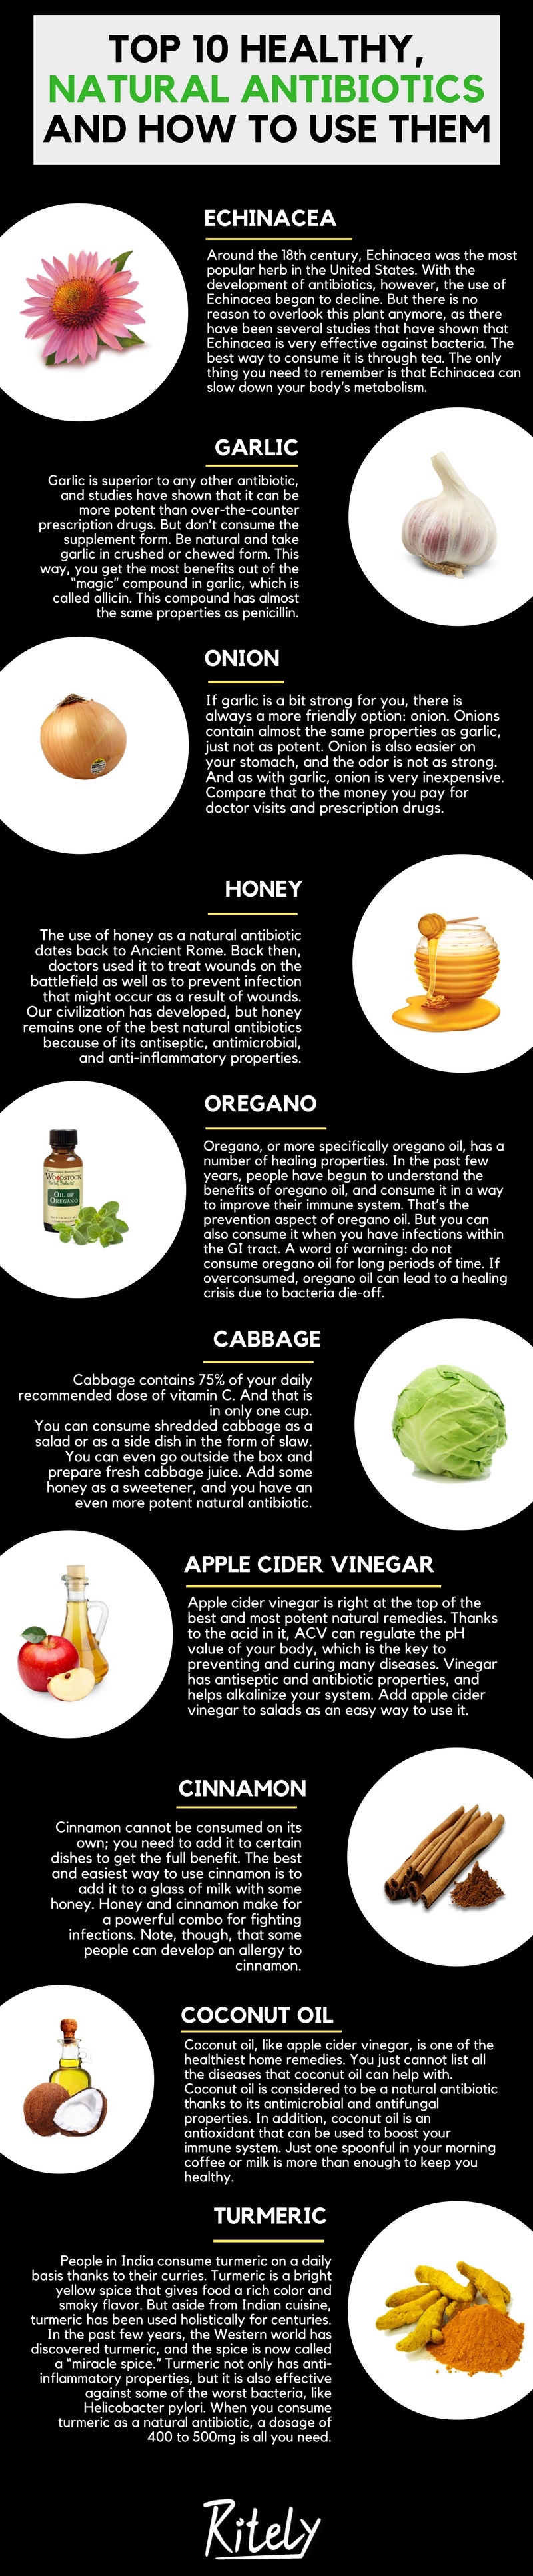 Top 16 Healthy, Natural Antibiotics and How to Use Them